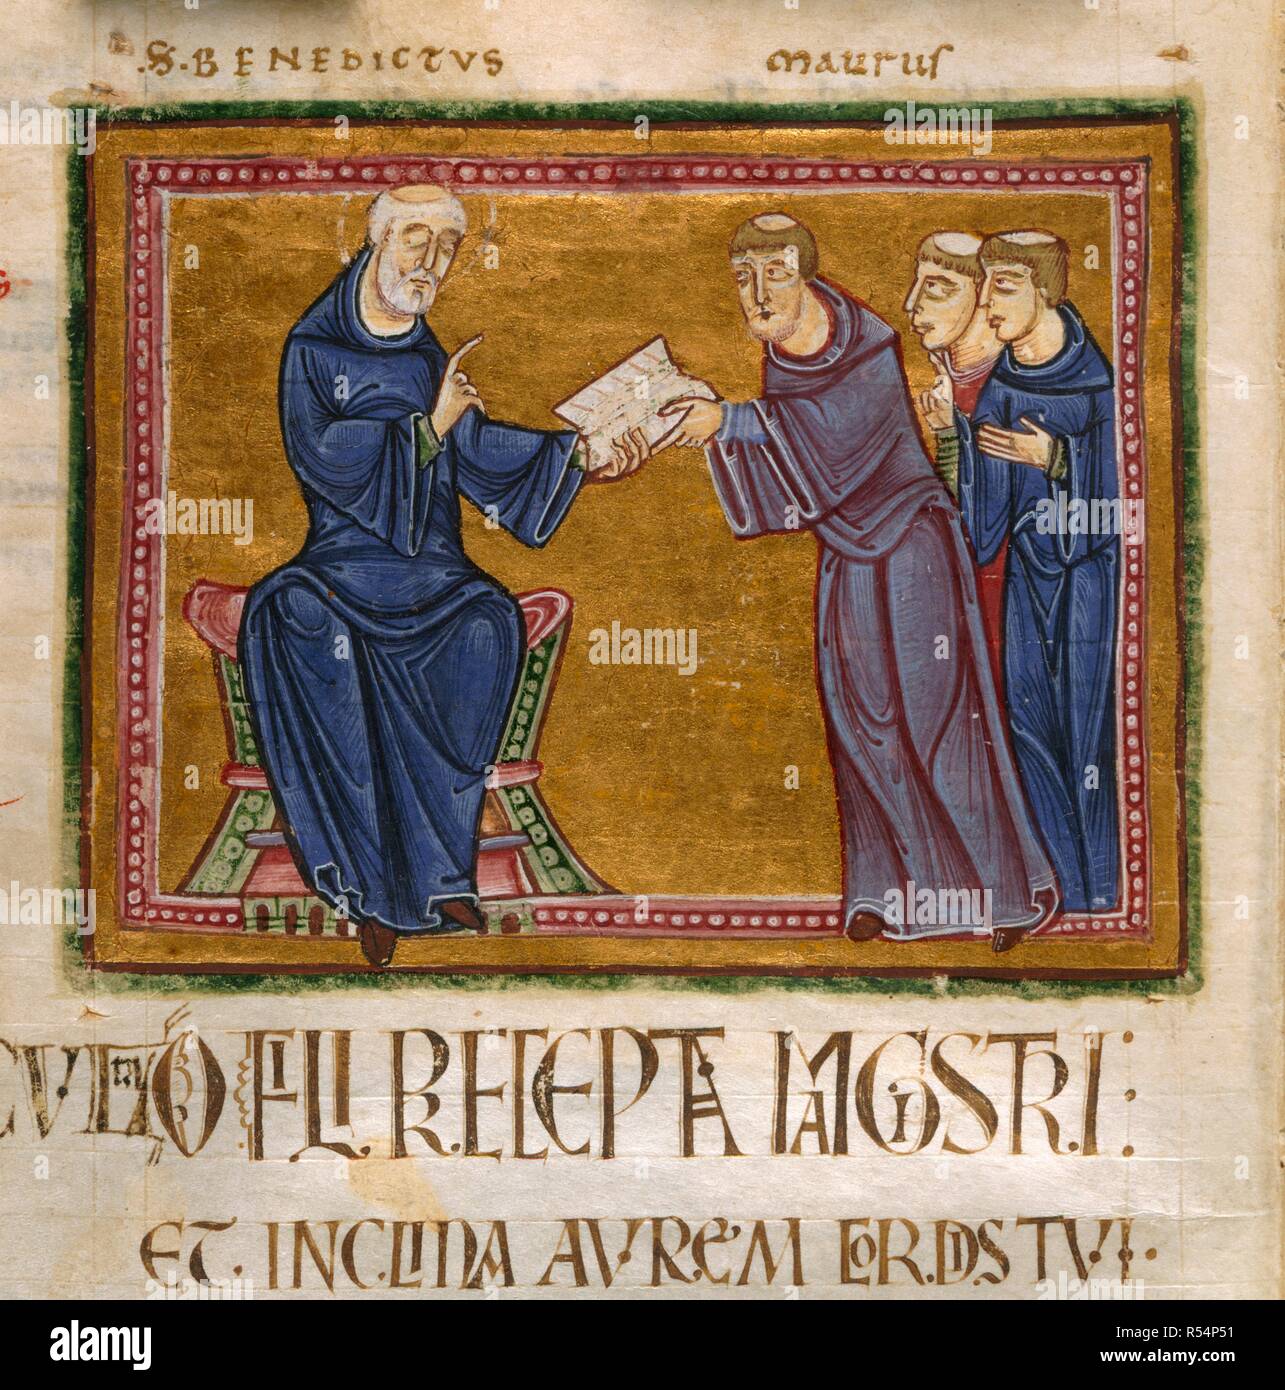 St. Benedict delivering his Rule. Rule of St Benedict. France [Monastery of St. Gilles, Nimes]; 1129. (Miniature only) St. Benedict delivering his Rule to St. Maurus and other monks of his order  Image taken from Rule of St Benedict.  Originally published/produced in France [Monastery of St. Gilles, Nimes]; 1129. . Source: Add. 16979, f.21v. Language: Latin. Stock Photo